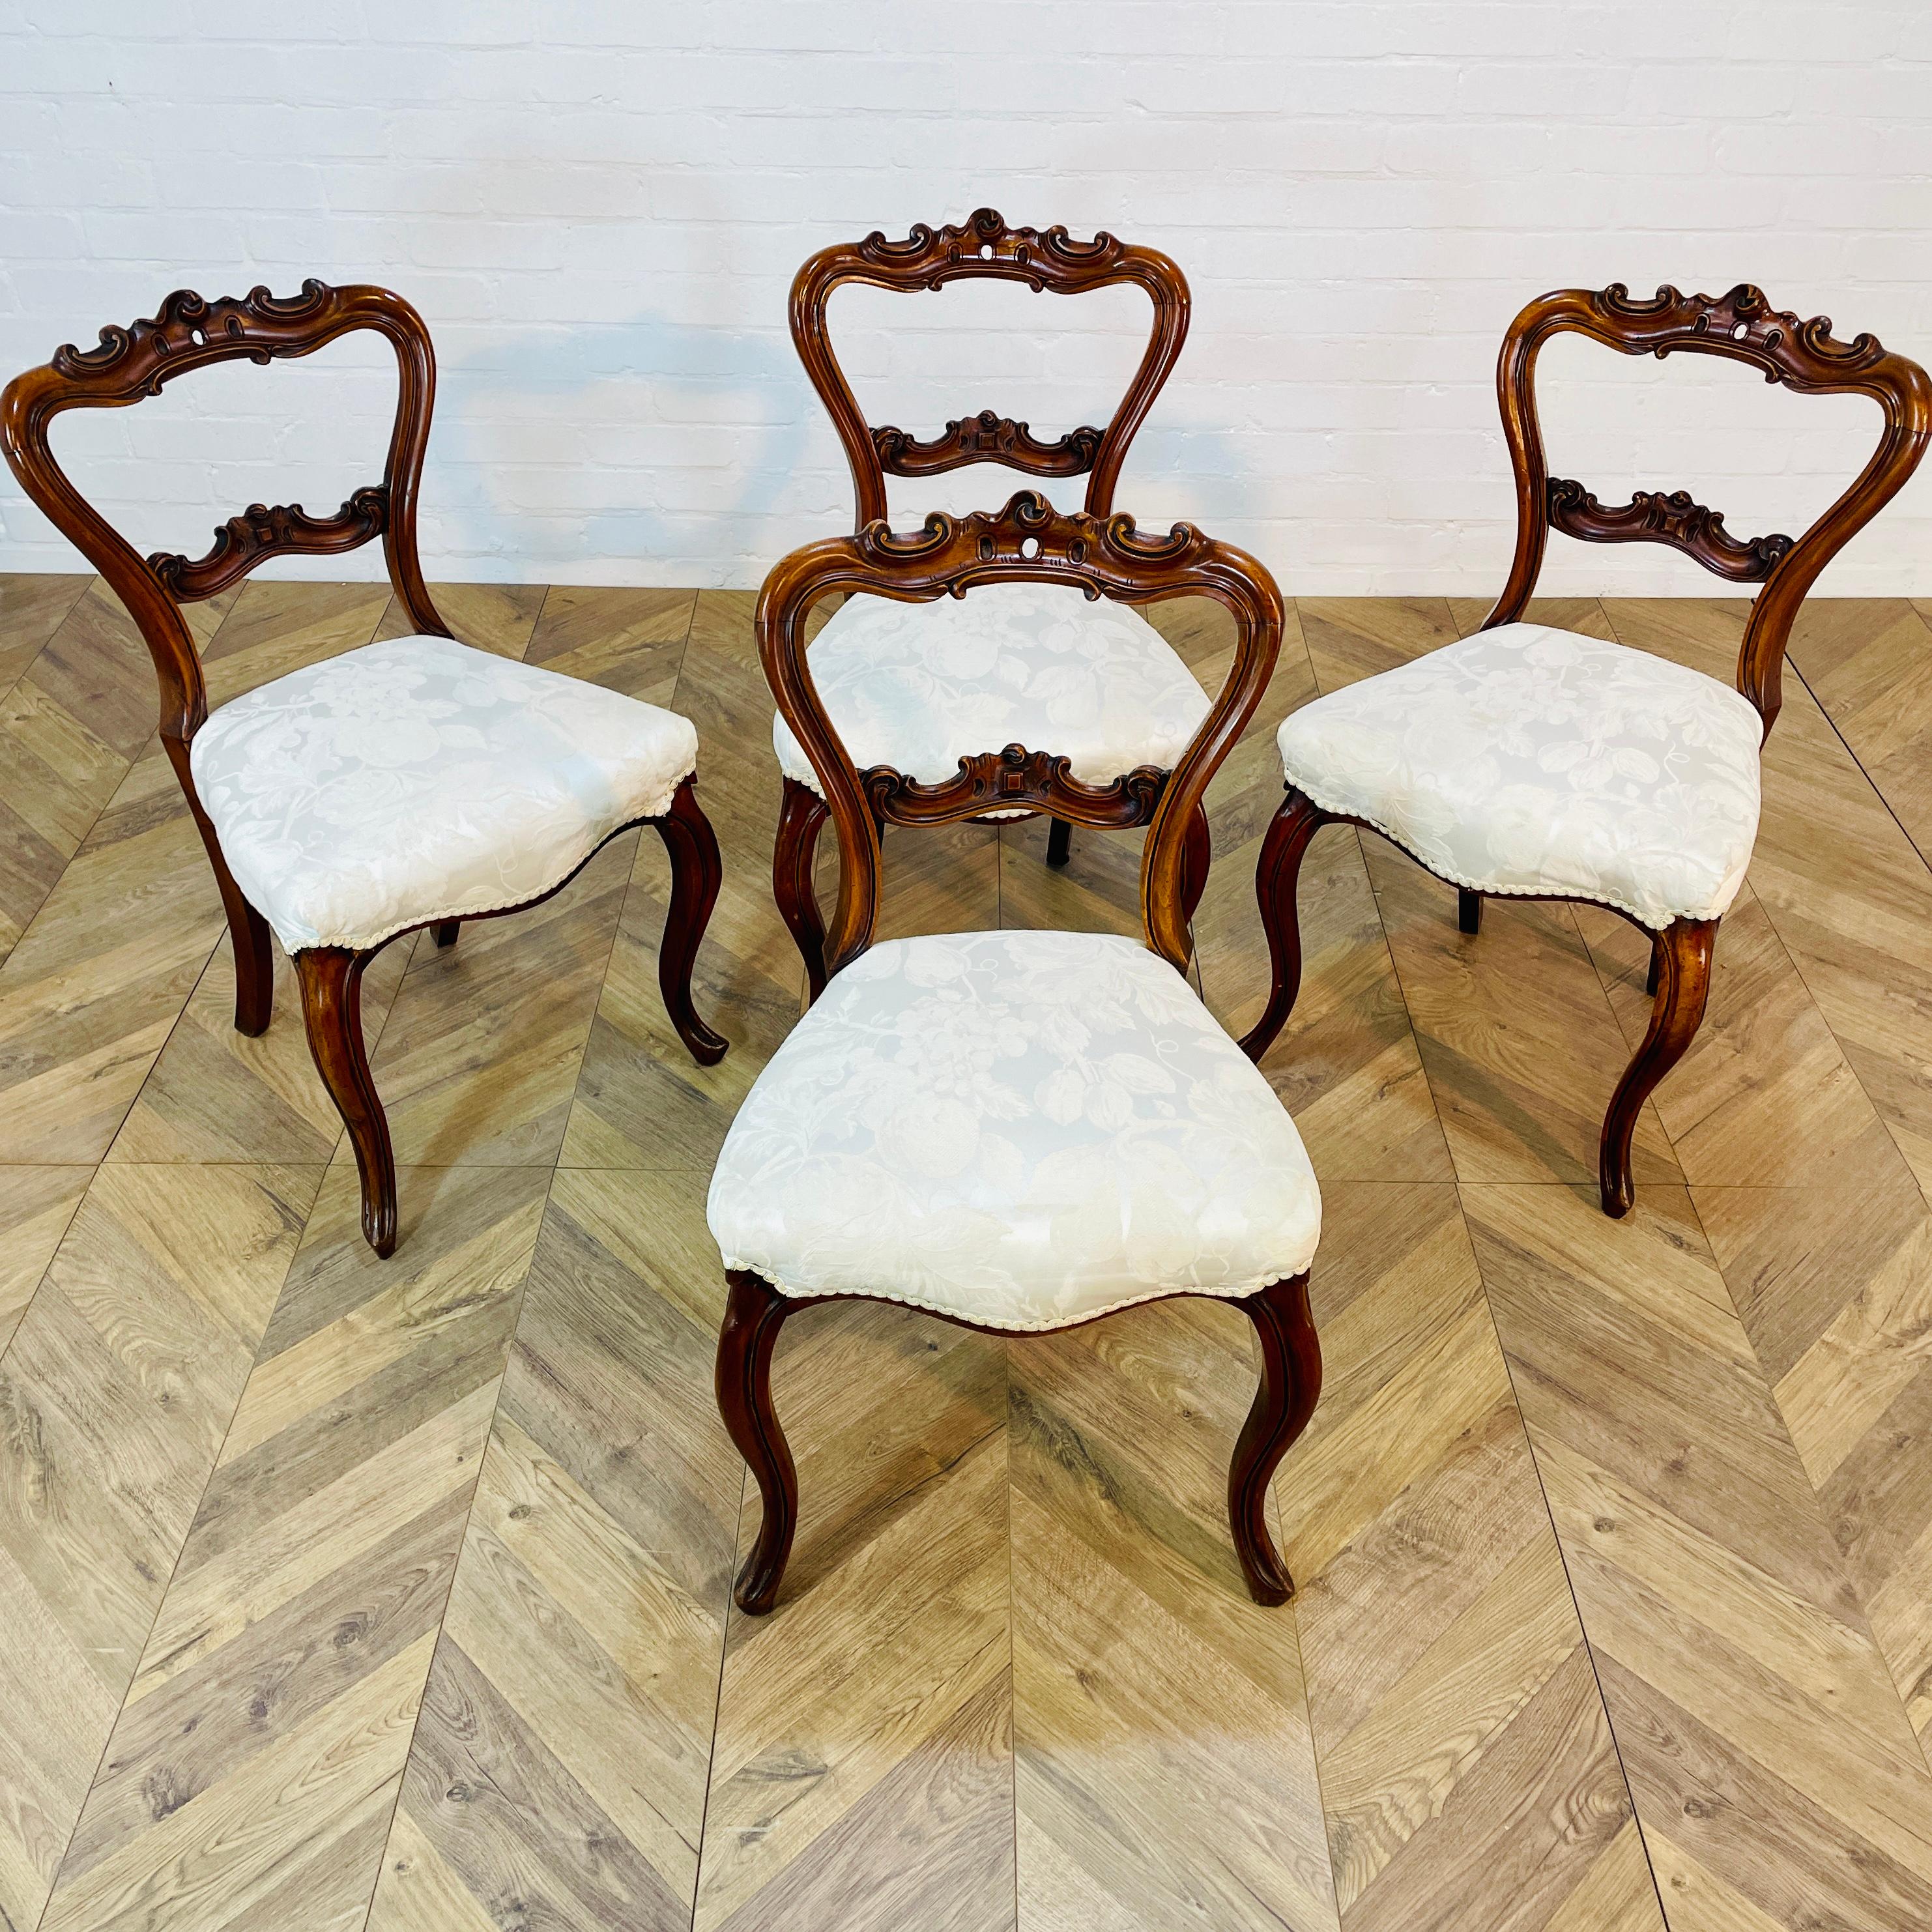 Set of Four Wonderful Early Victorian Solid Rosewood Dining Chairs, Circa 1840-1860. 

They are of superb quality and have beautiful form, with curvaceous backs & cabriole legs. 

The solid rosewood frames are superbly carved and in good solid